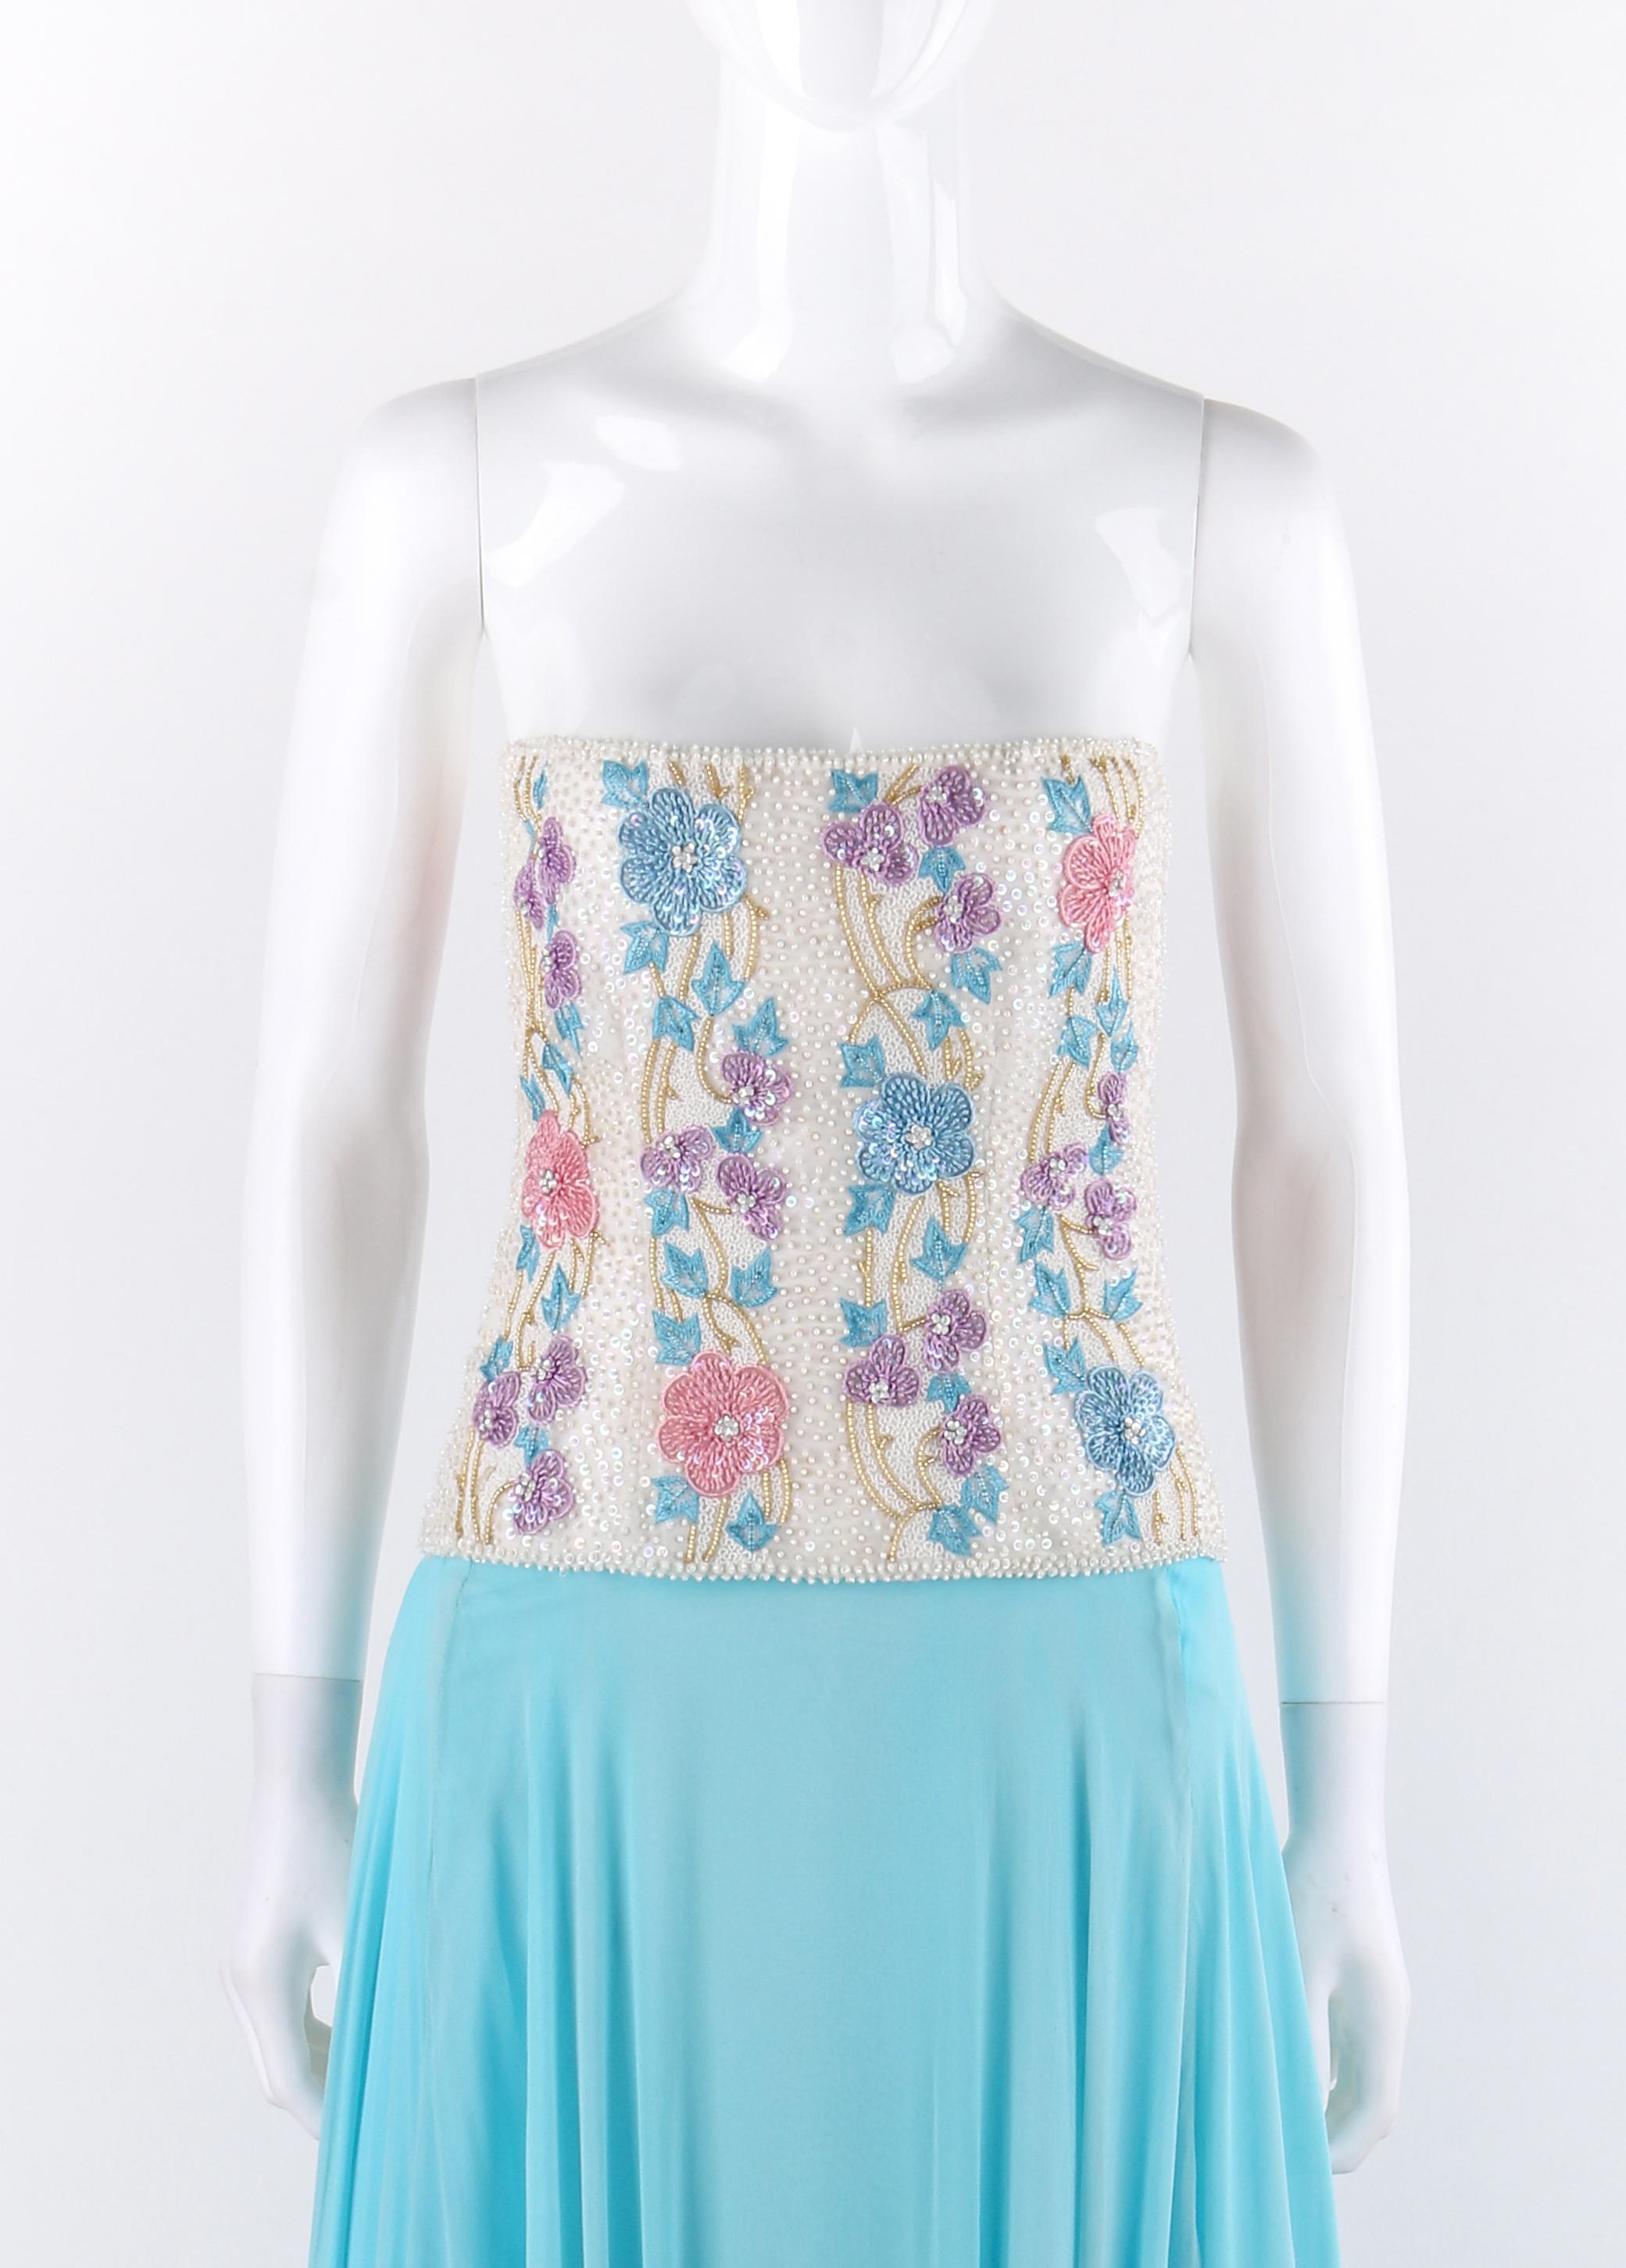 RICHILENE c.1980's Blue Silk Chiffon Floral Bead Embroidery Strapless Dress Gown
 
Circa: 1980’s
Label(s): Richilene New York
Designer: Ilene Pacun & Richard Pacun
Style: Strapless gown
Color(s): Shades of blue, beige, purple, pink, yellow